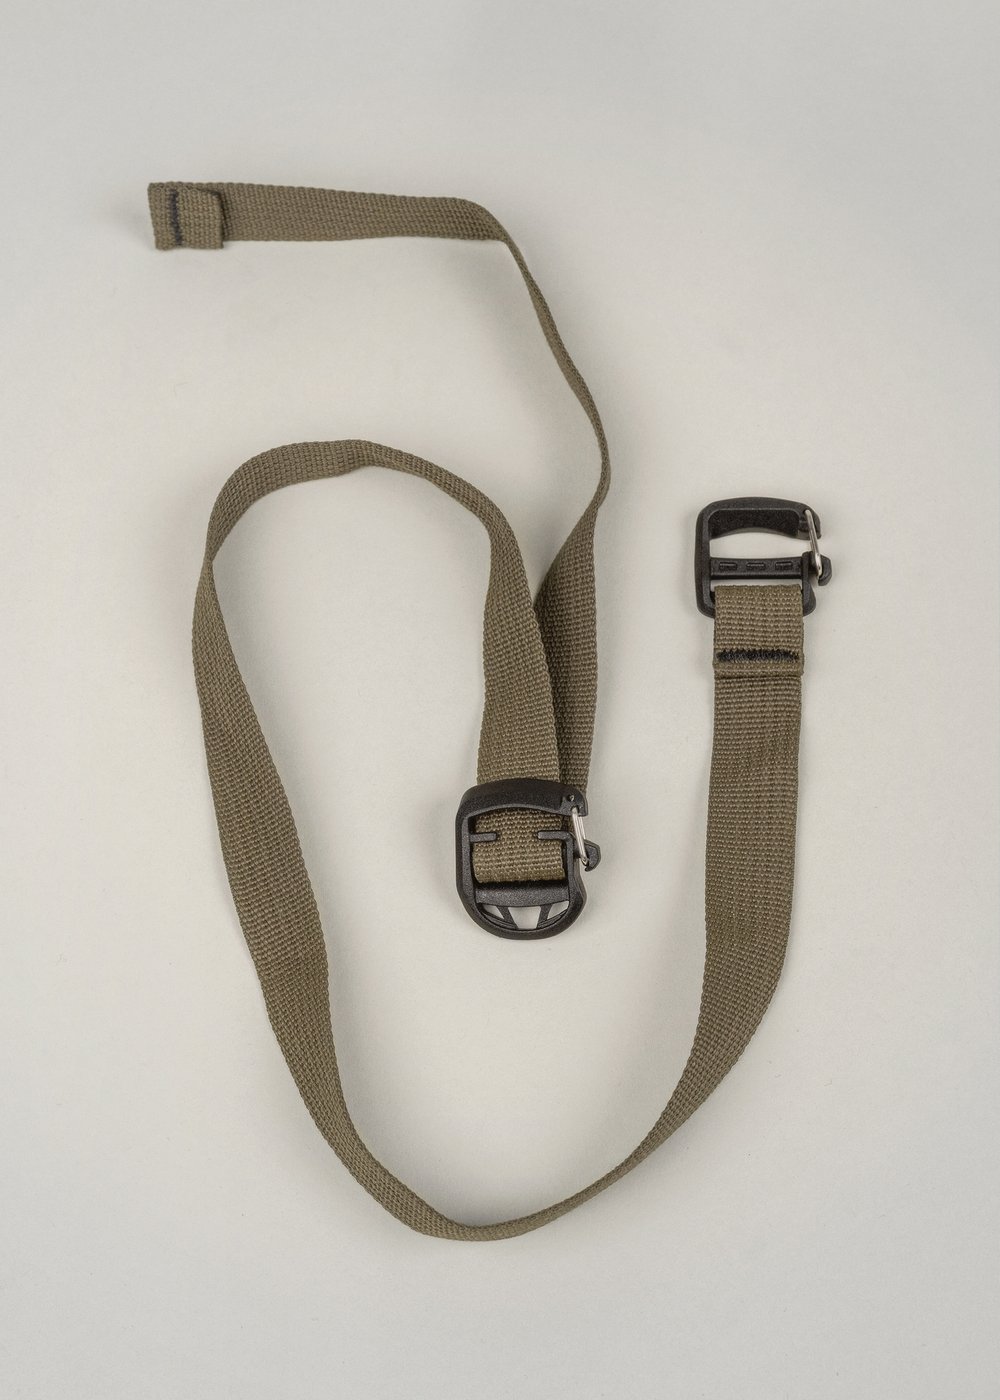 The Y-Strap — Evolved Supply Co.